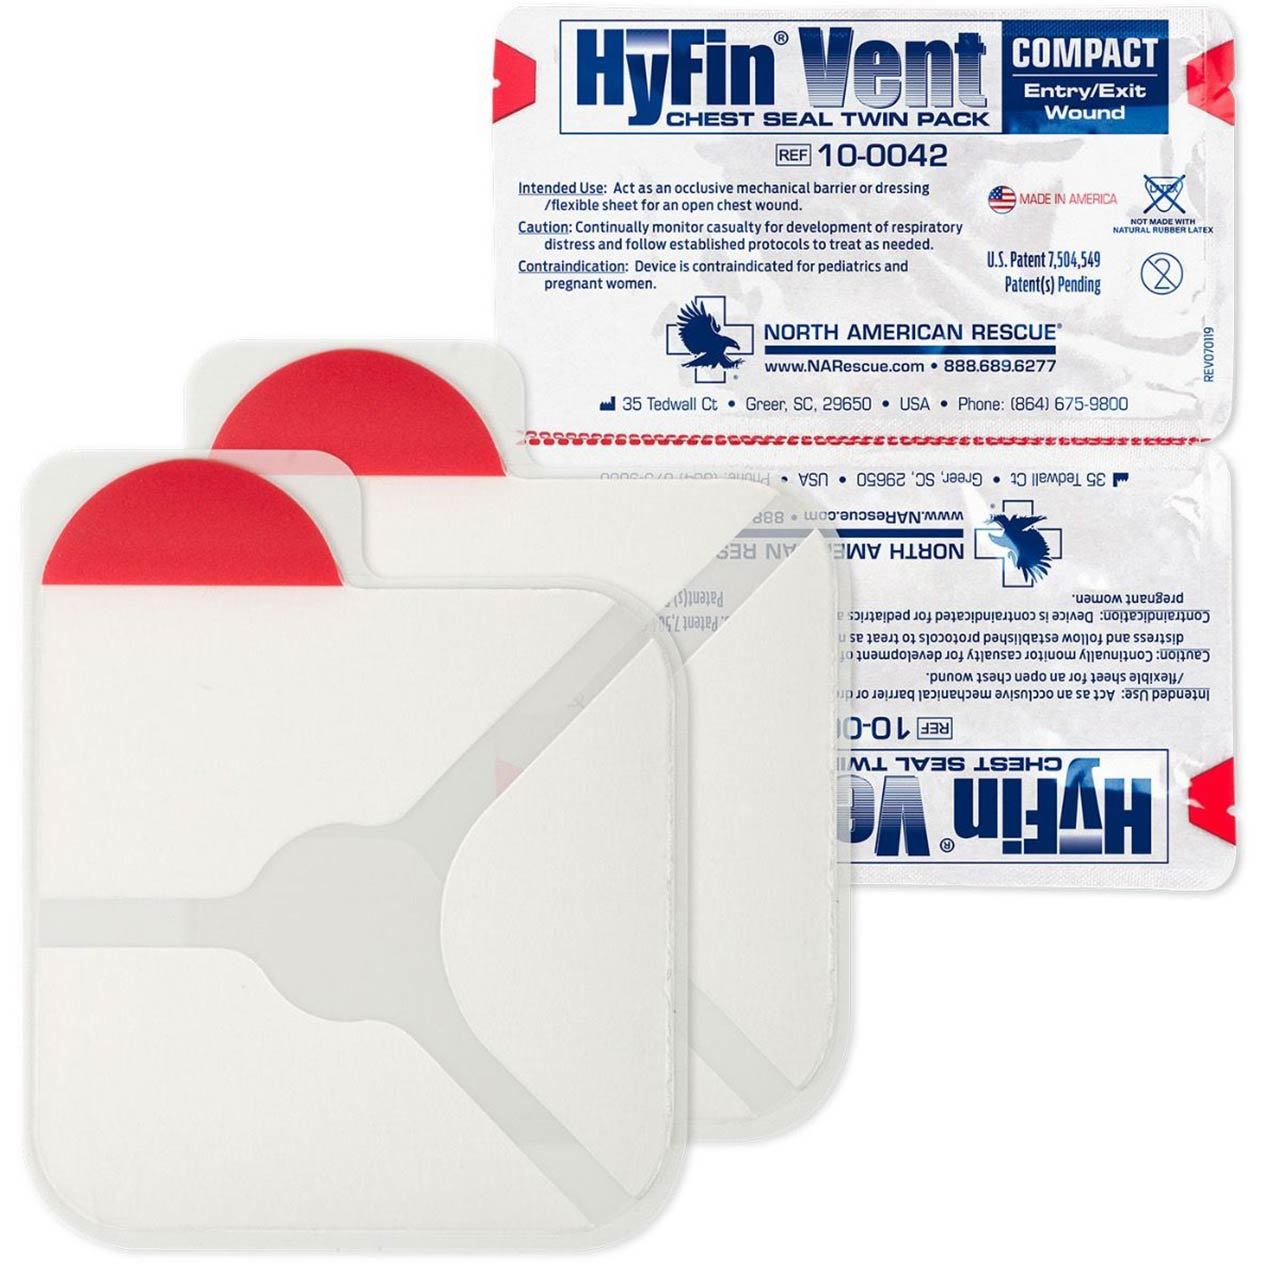 HyFin-Vent-COMPACT-Chest-Seal-Twin-Pack